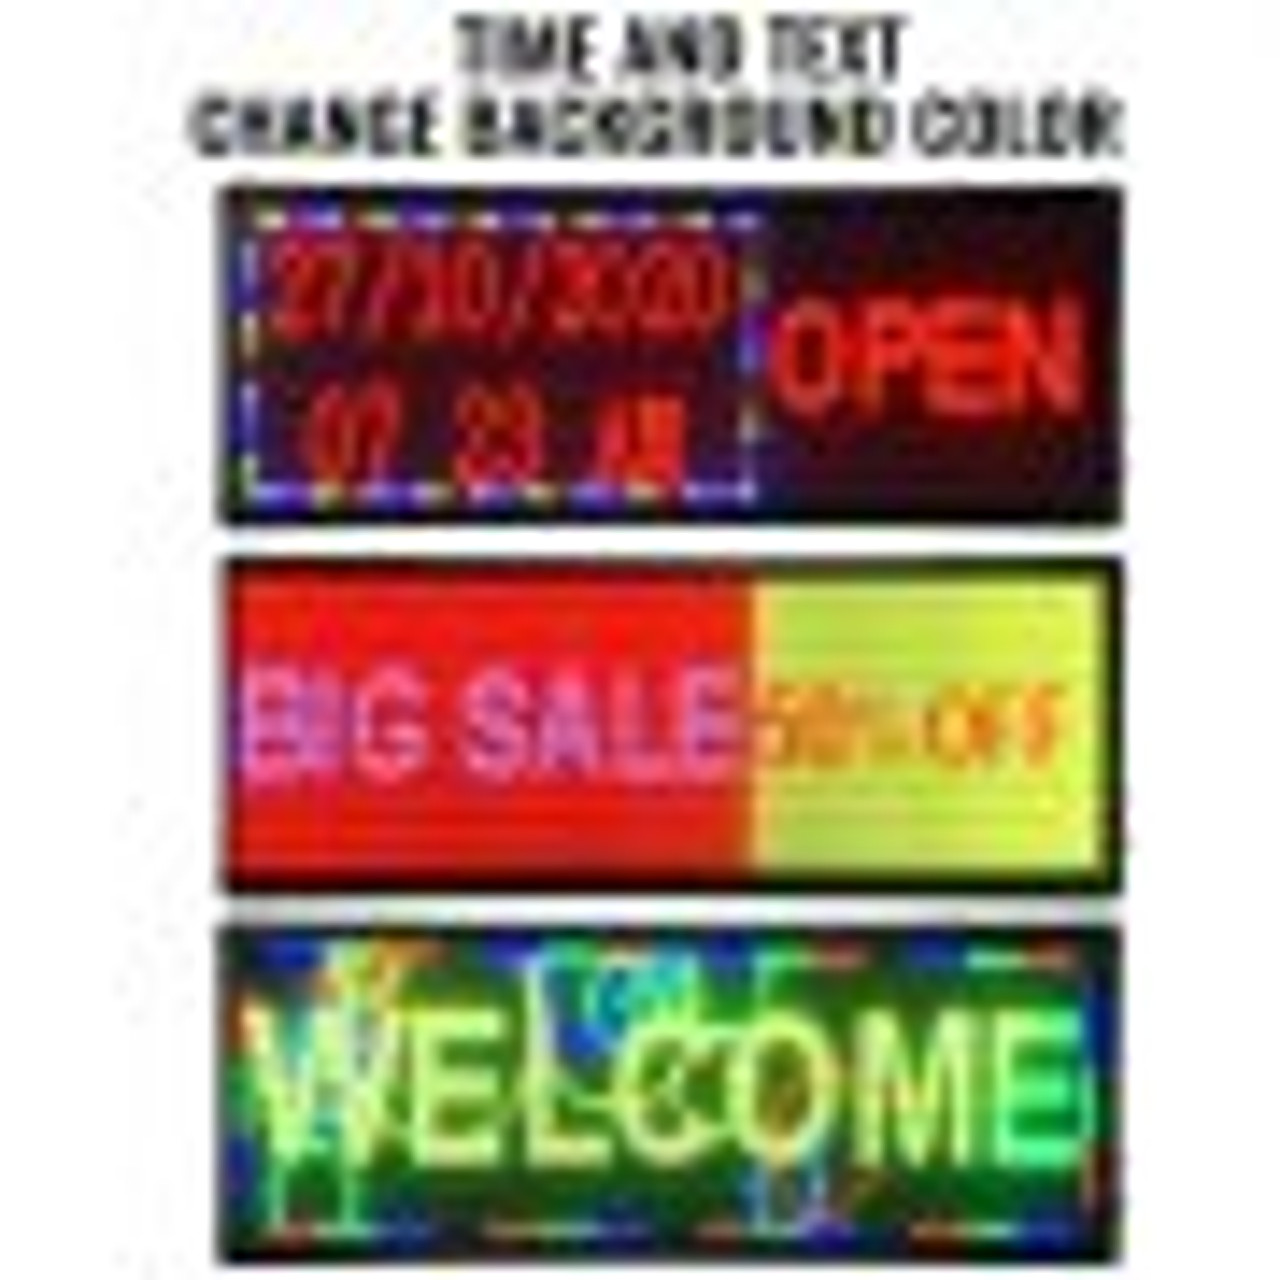 Led Sign 40" x 15" Digital Sign Full Color Color Indoor with high Resolution P10 Led Scrolling Display Programmable by PC & WiFi & USB for Advertising